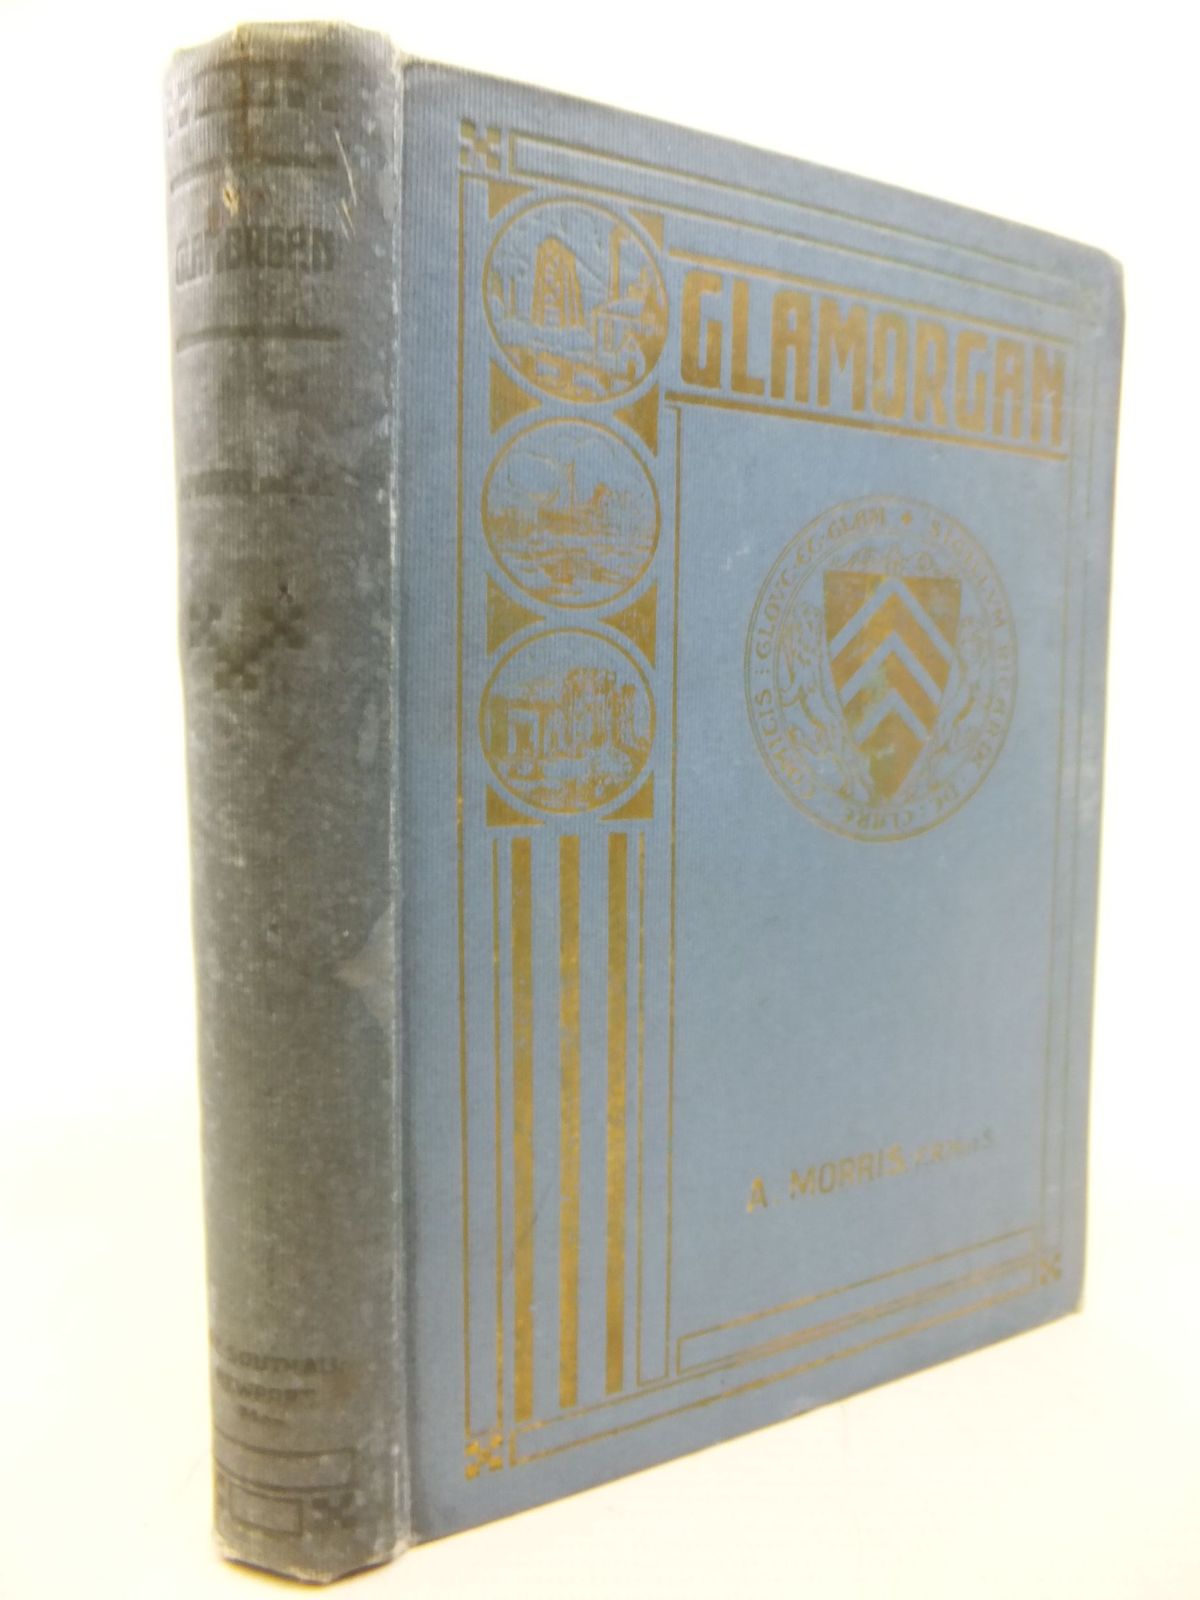 Photo of GLAMORGAN written by Morris, A. published by John E. Southall (STOCK CODE: 1712701)  for sale by Stella & Rose's Books